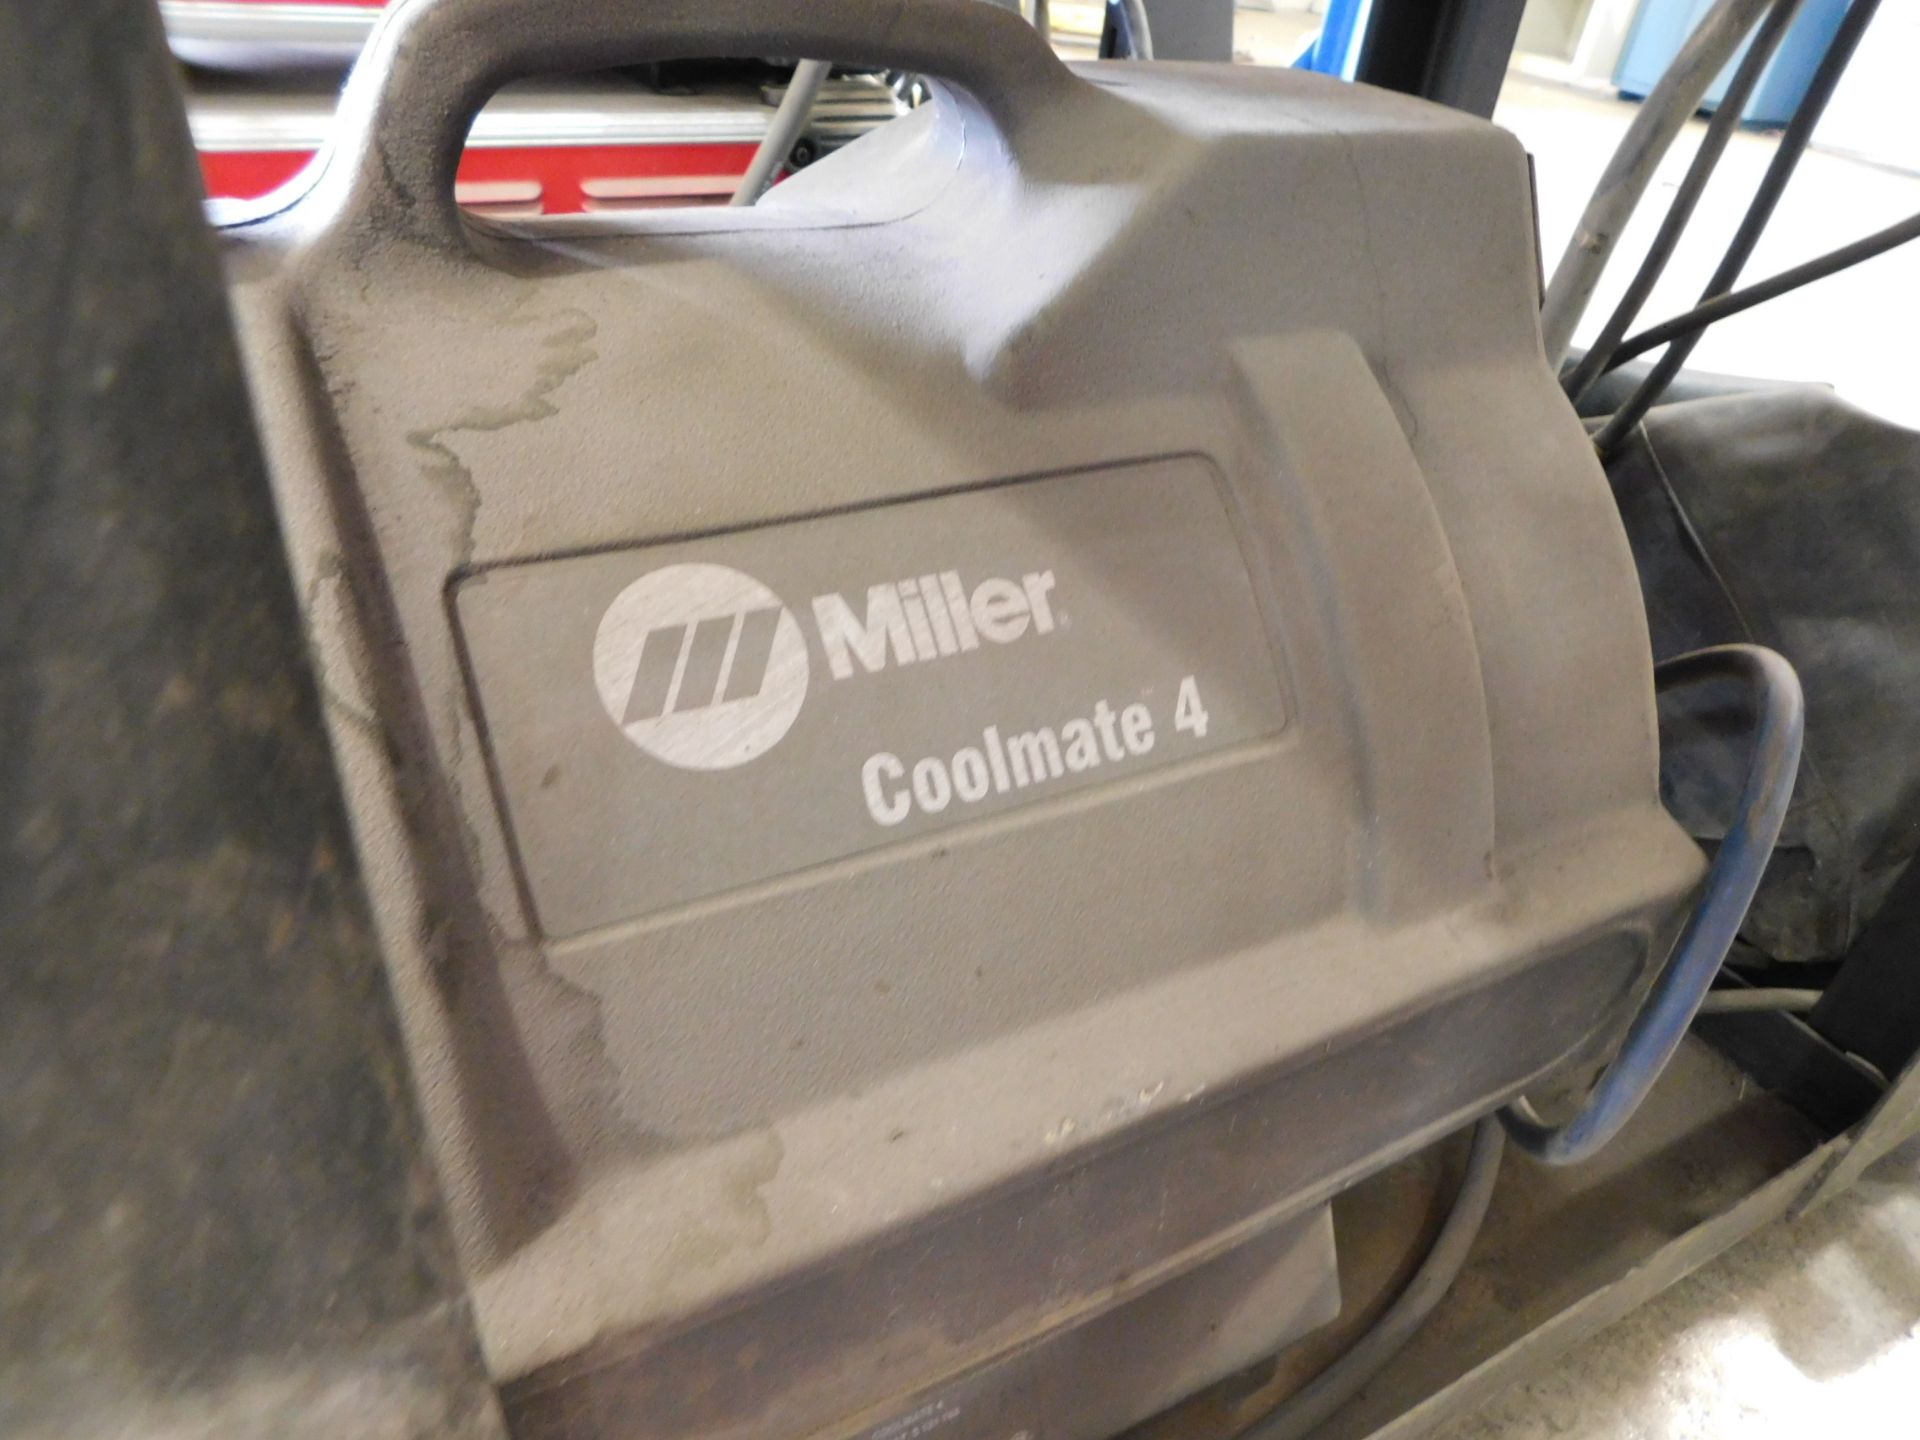 Lincoln Square Wave Tig 175, SN U1960610156 With Miller Coolmate 4 Chiller and Cart, 230V, 1 phs. - Image 3 of 4